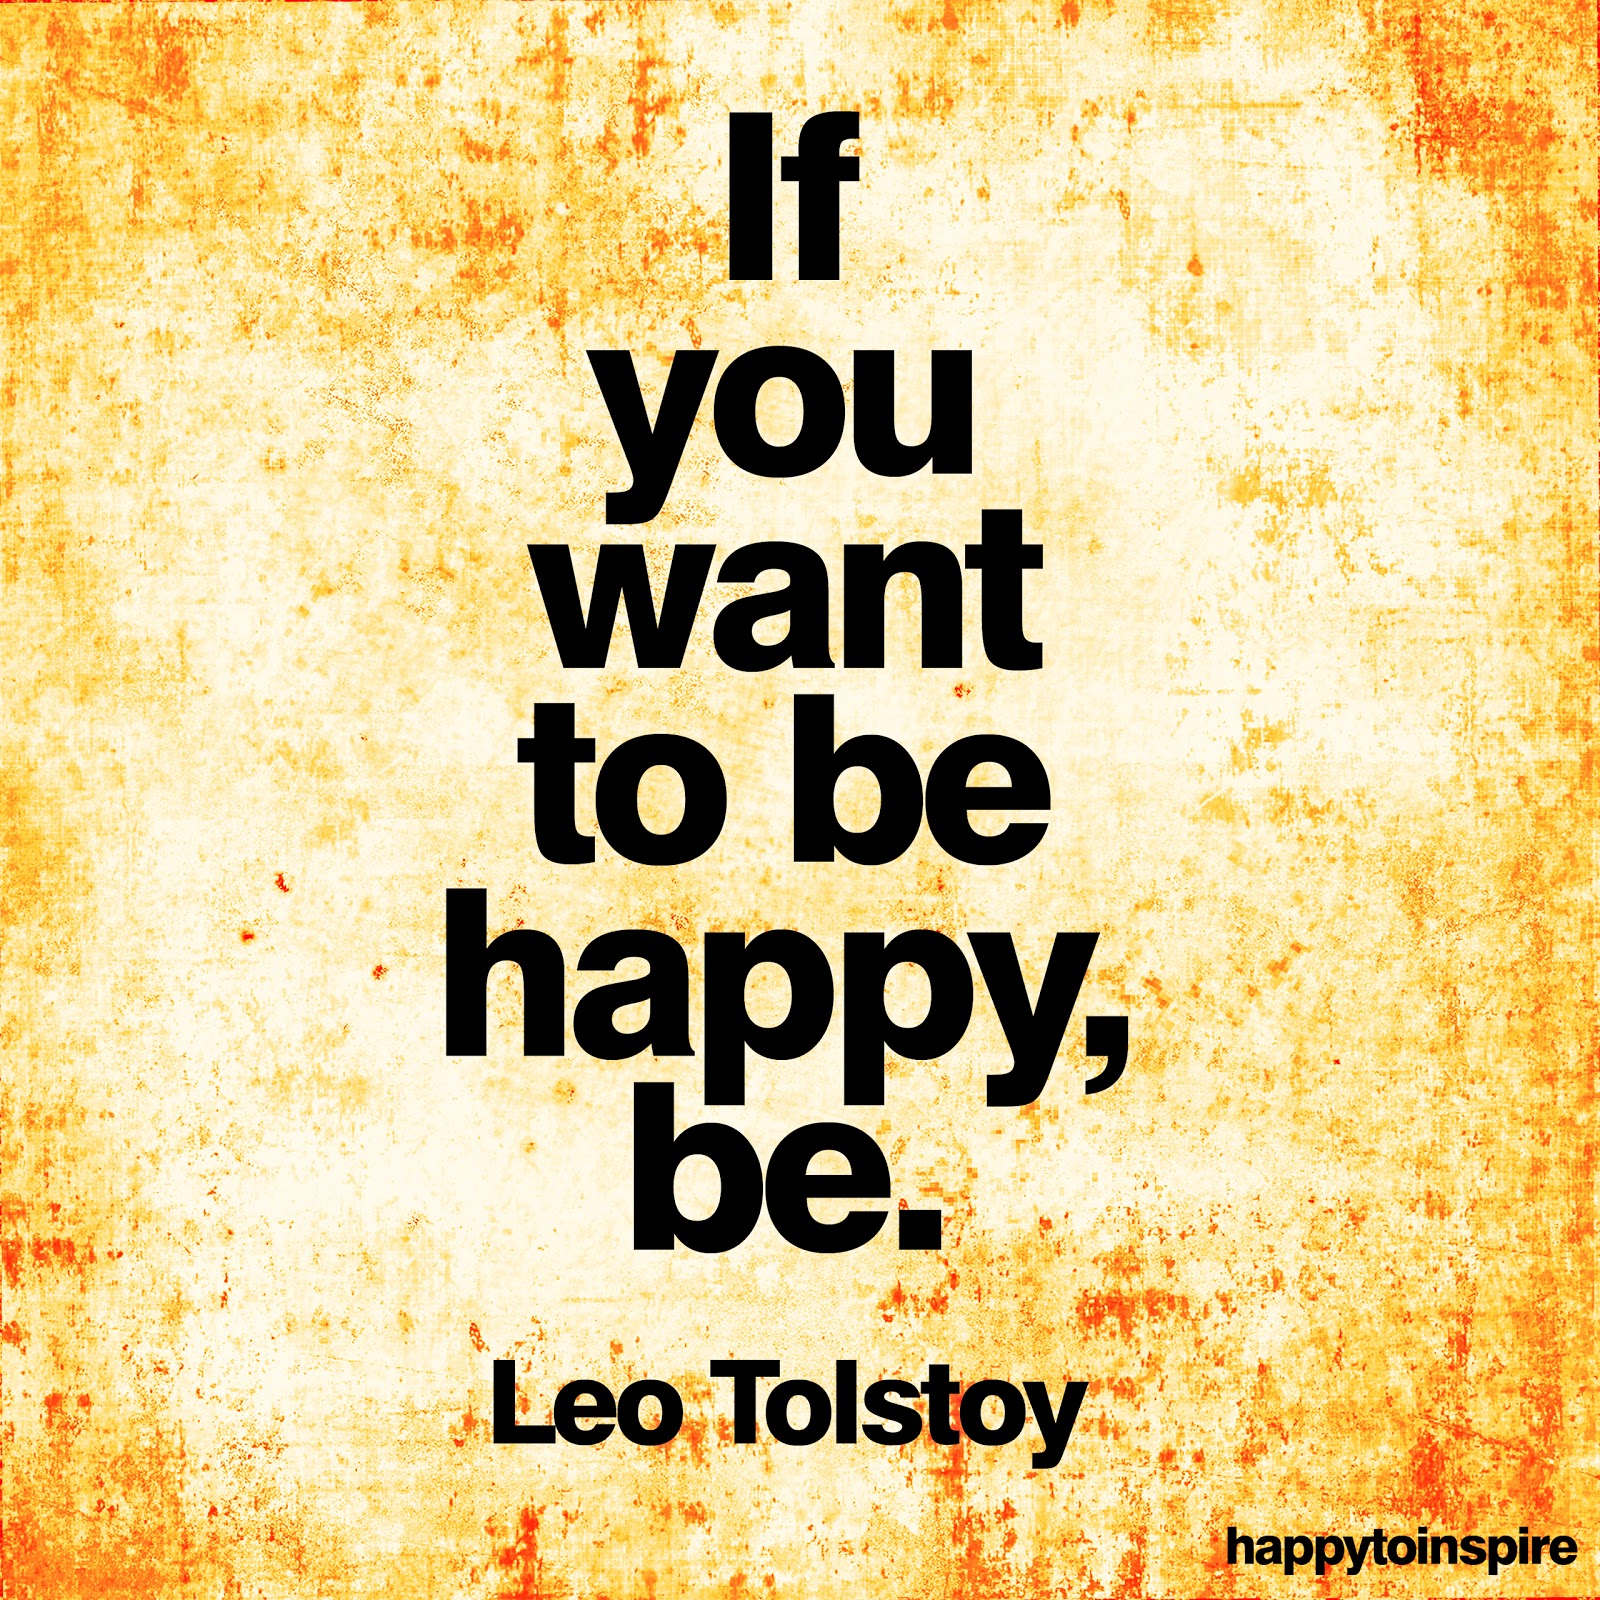 Try to be happy